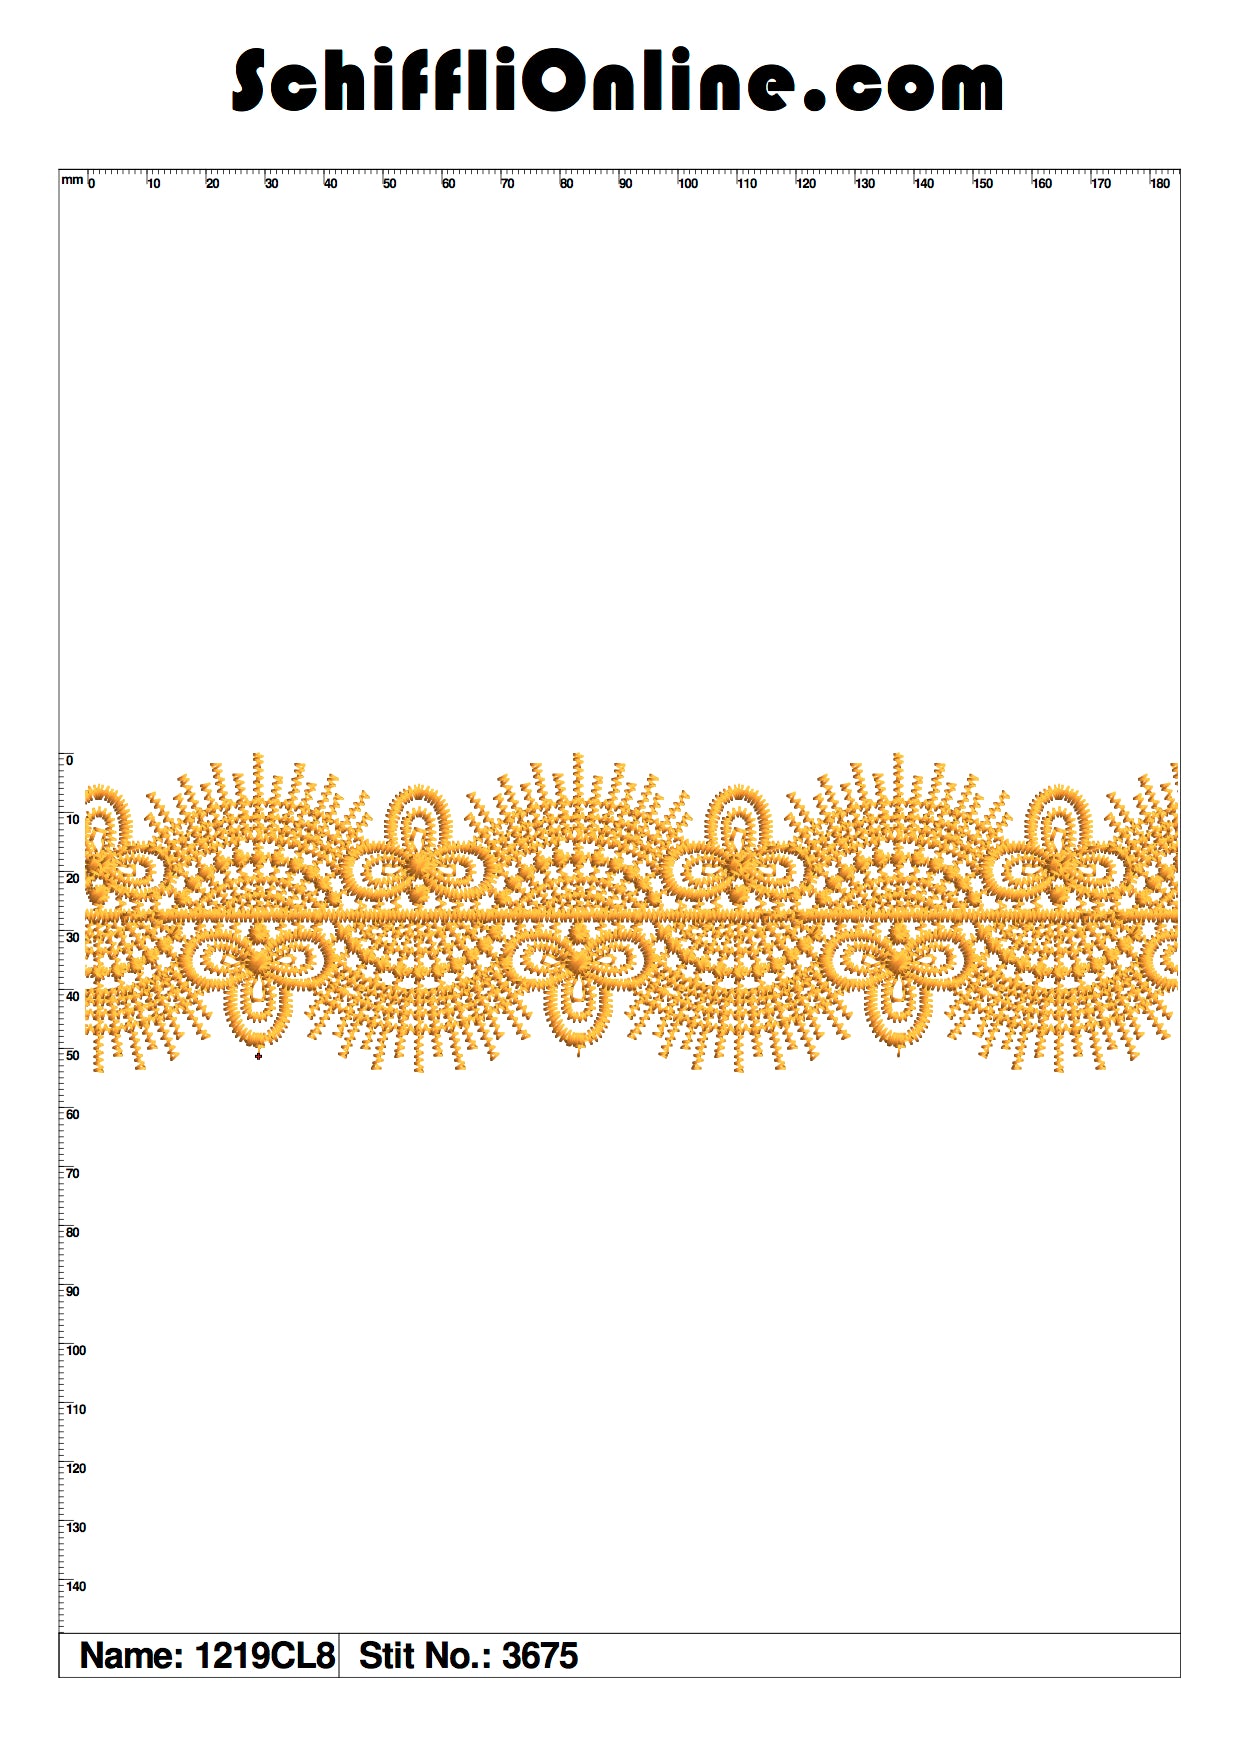 Book 141 CHEMICAL LACE 8X4 50 DESIGNS